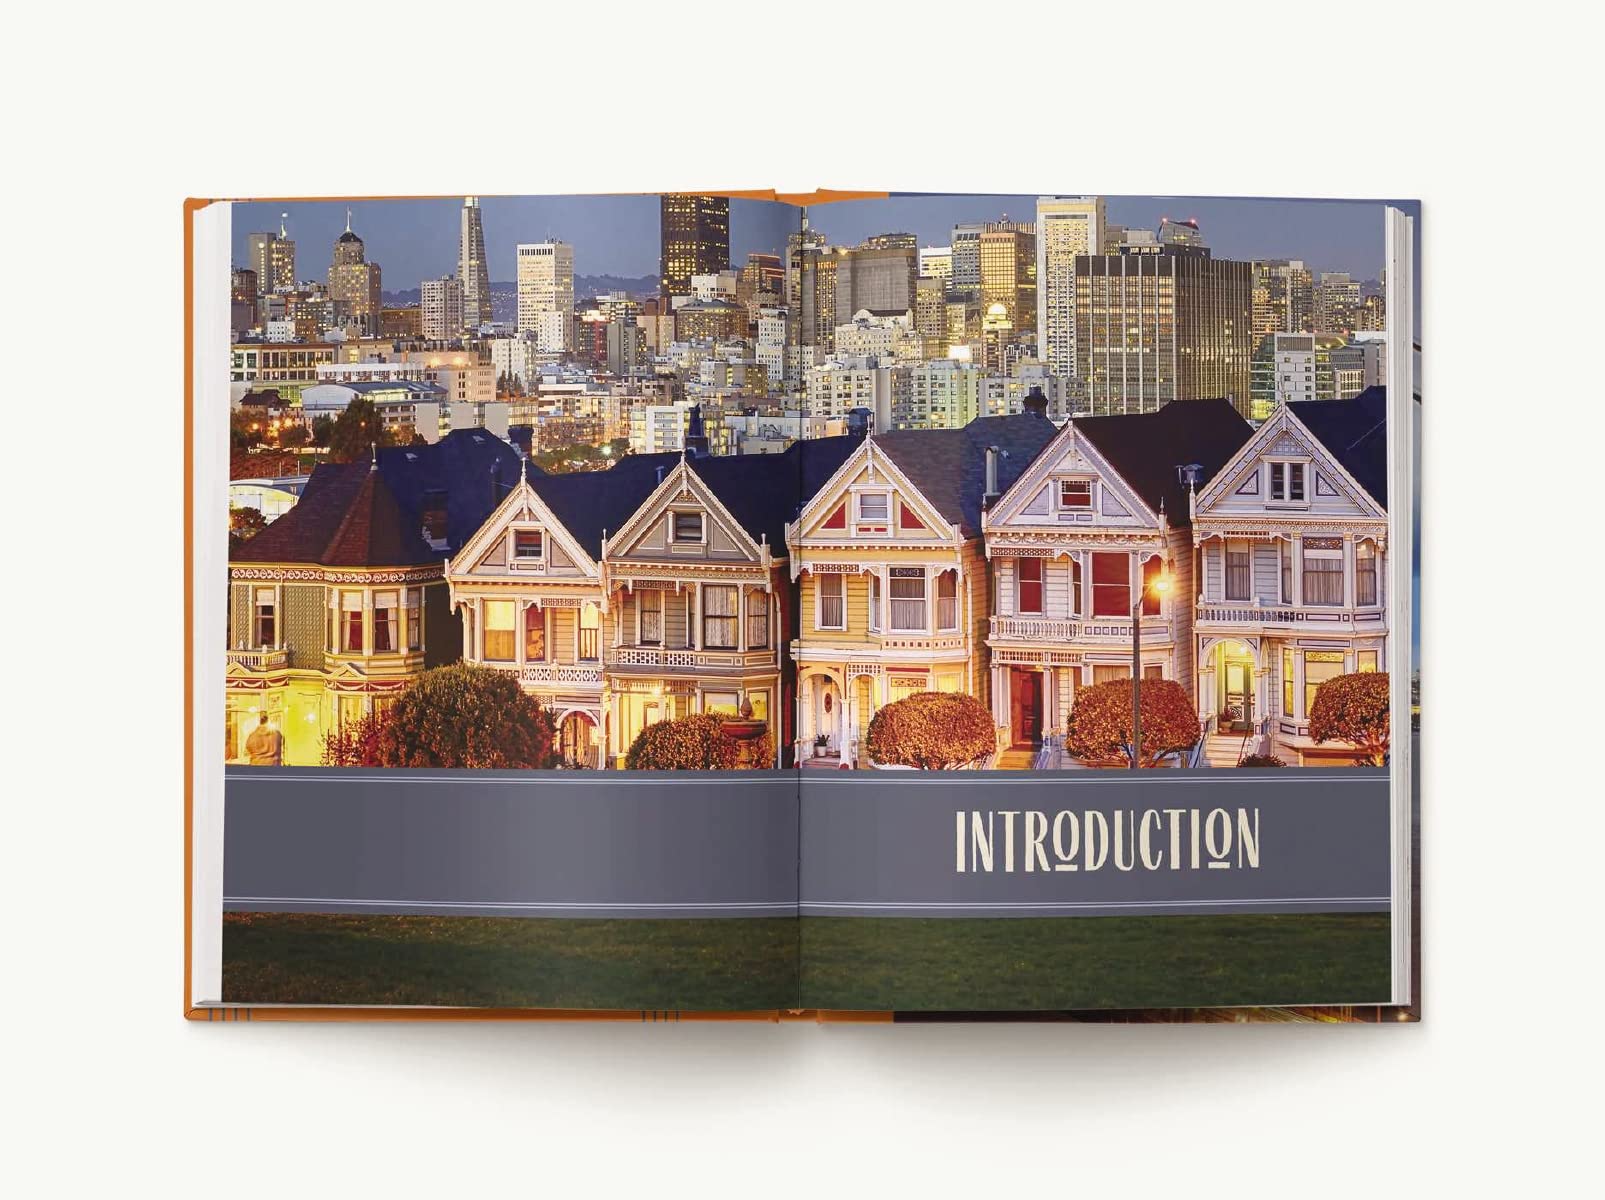 San Francisco Cocktails: An Elegant Collection of Over 100 Recipes Inspired by the City by the Bay (San Francisco History, Cocktail History, San Fran ... for Travelers and Foodies) (City Cocktails)